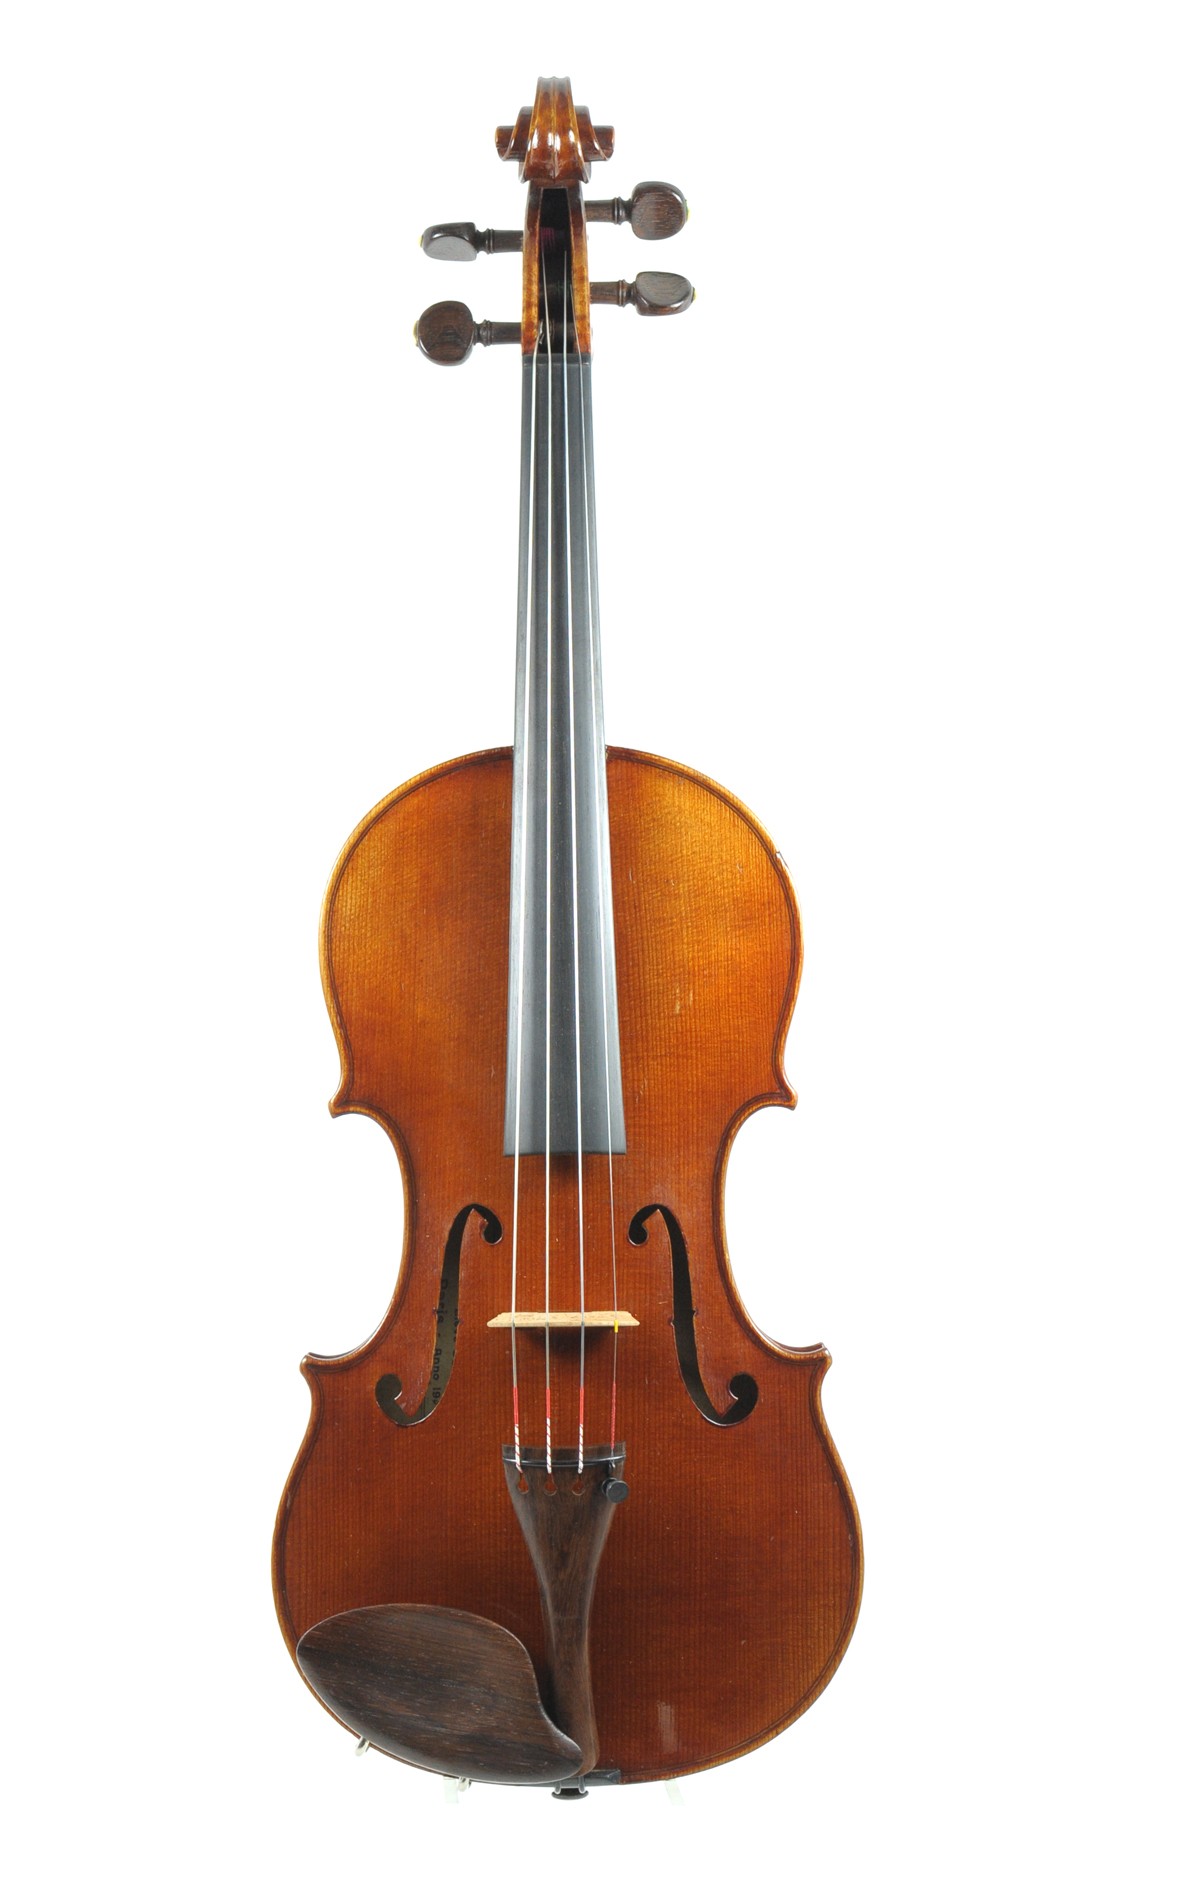 Charotte-Millot 1934 violin - front view